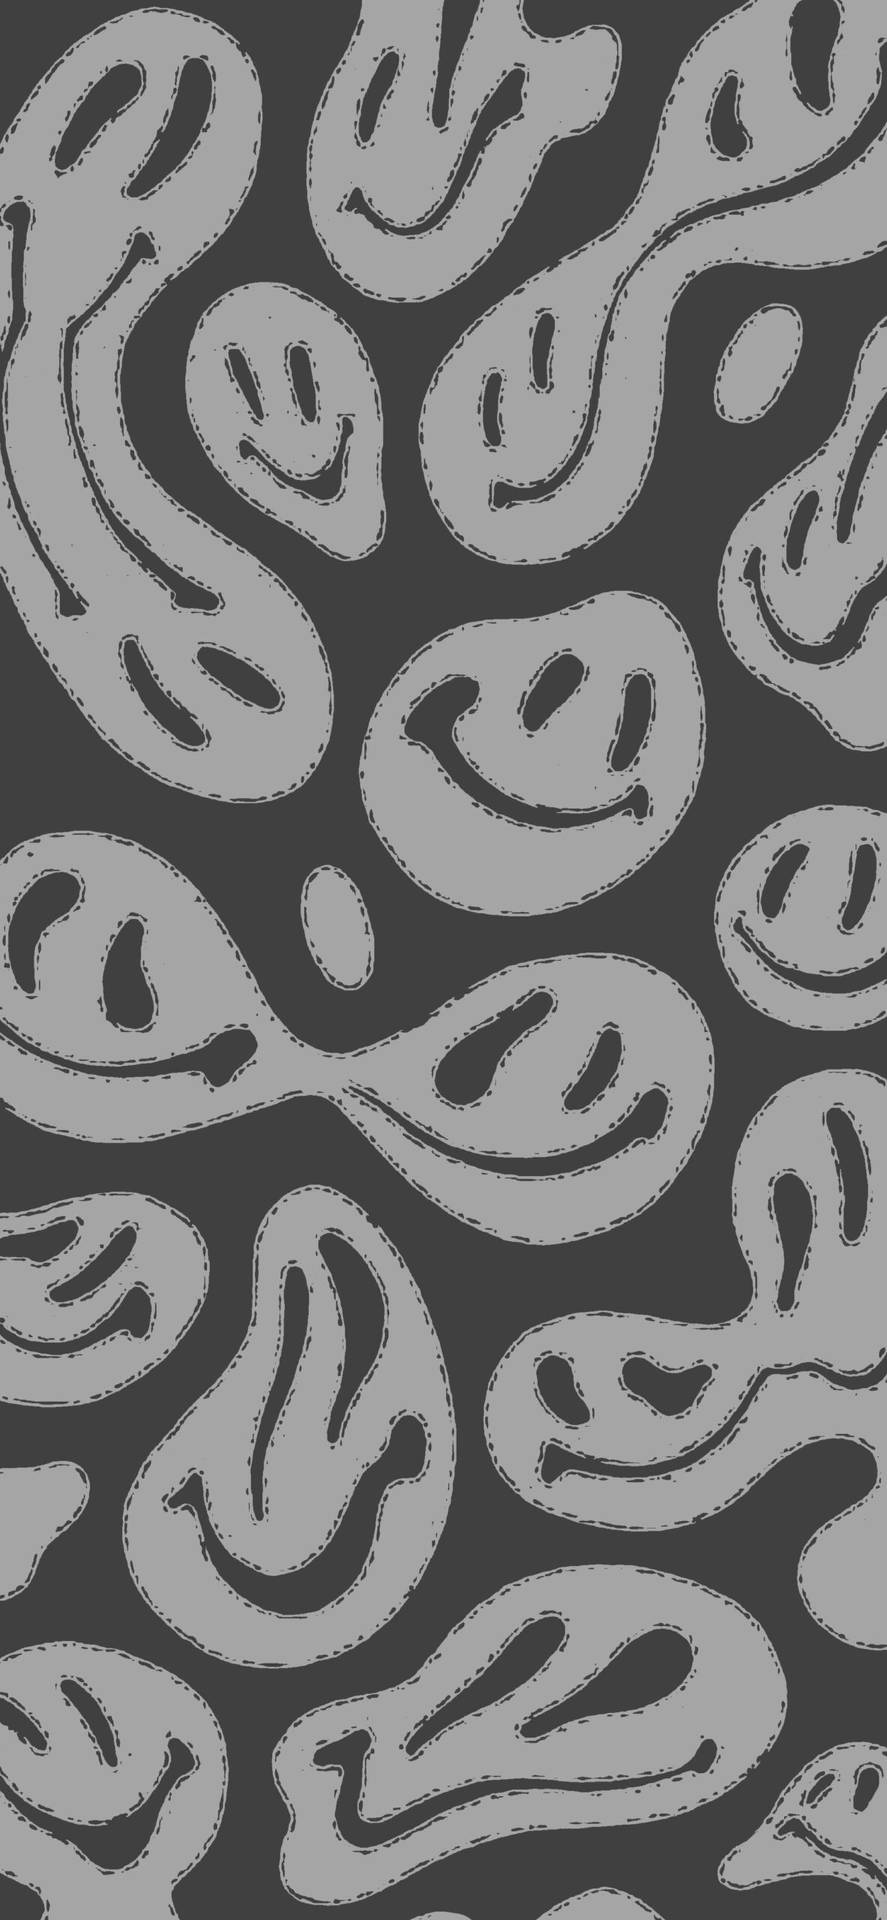 Grayscale Distorted Smiley Trippy Aesthetic